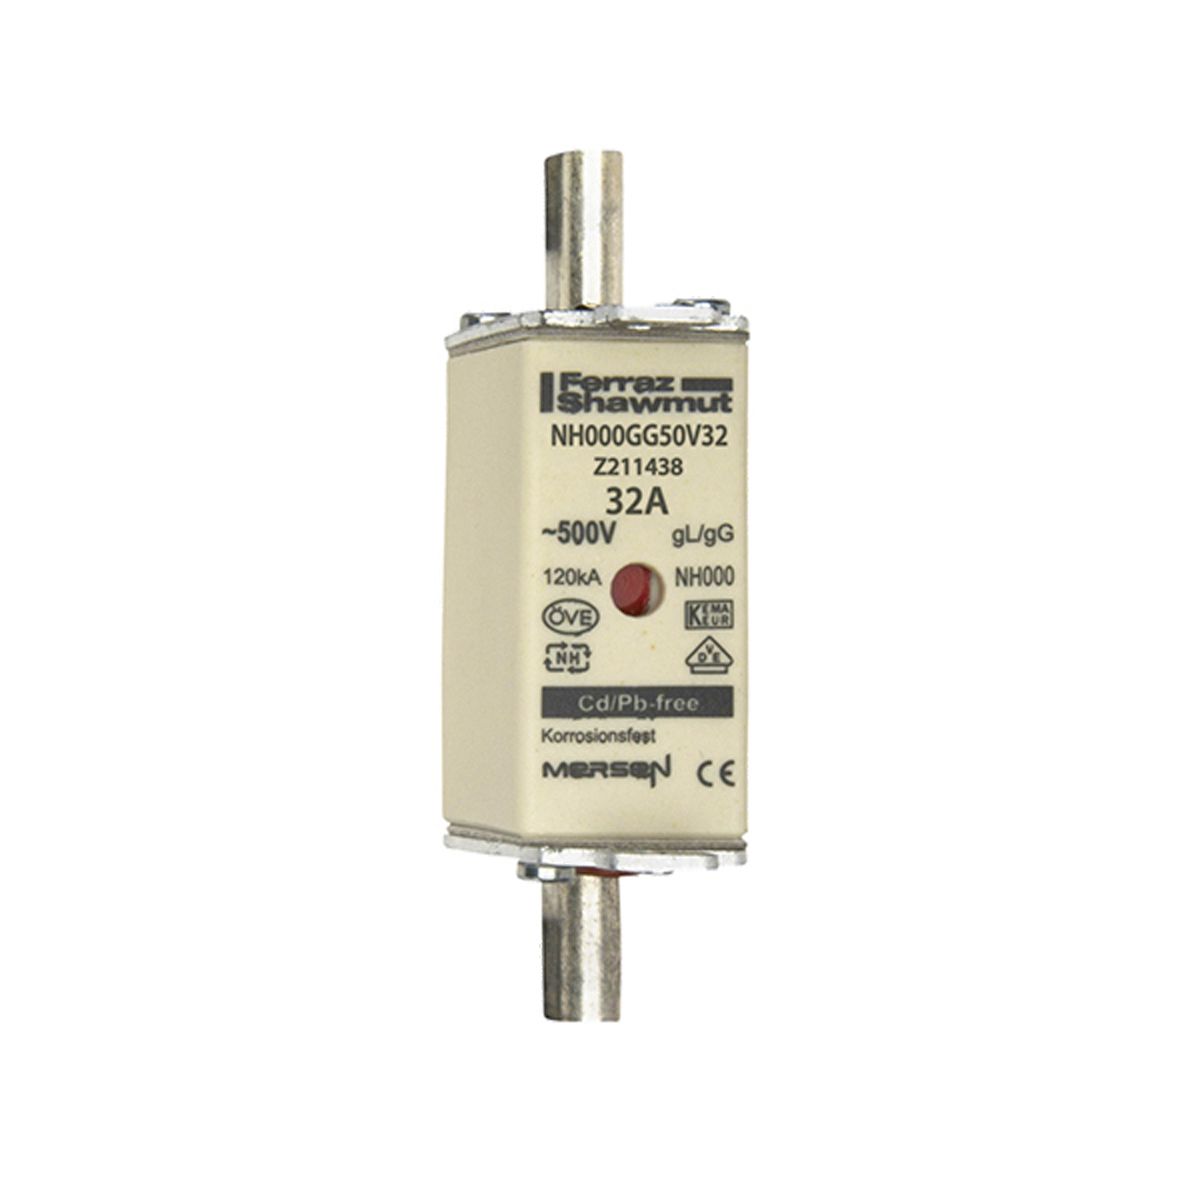 Z211438C - NH fuse-link gG, 500VAC, size 000, 32A double indicator/live tags, qty 3